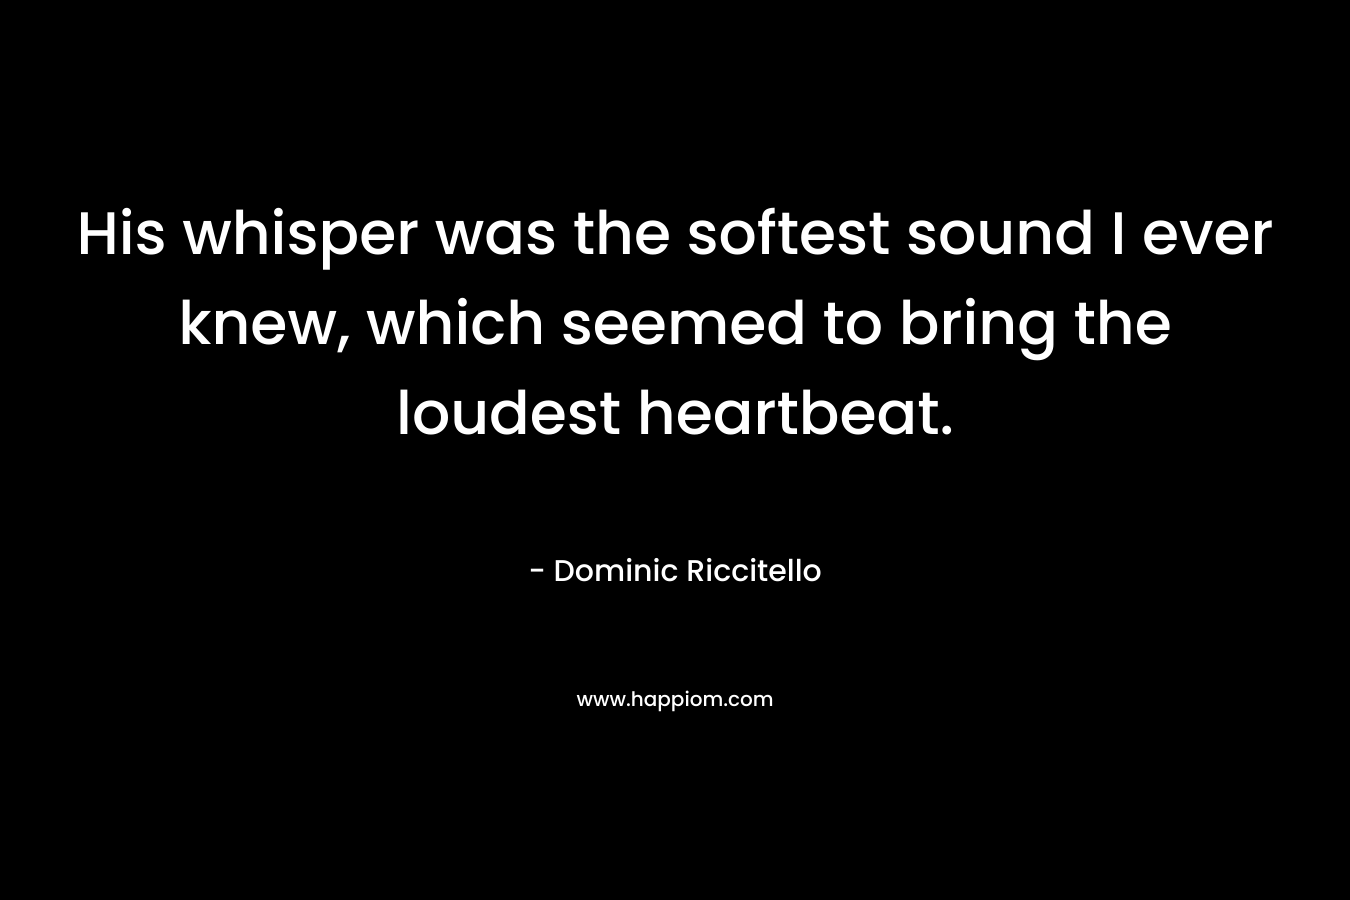 His whisper was the softest sound I ever knew, which seemed to bring the loudest heartbeat. – Dominic Riccitello